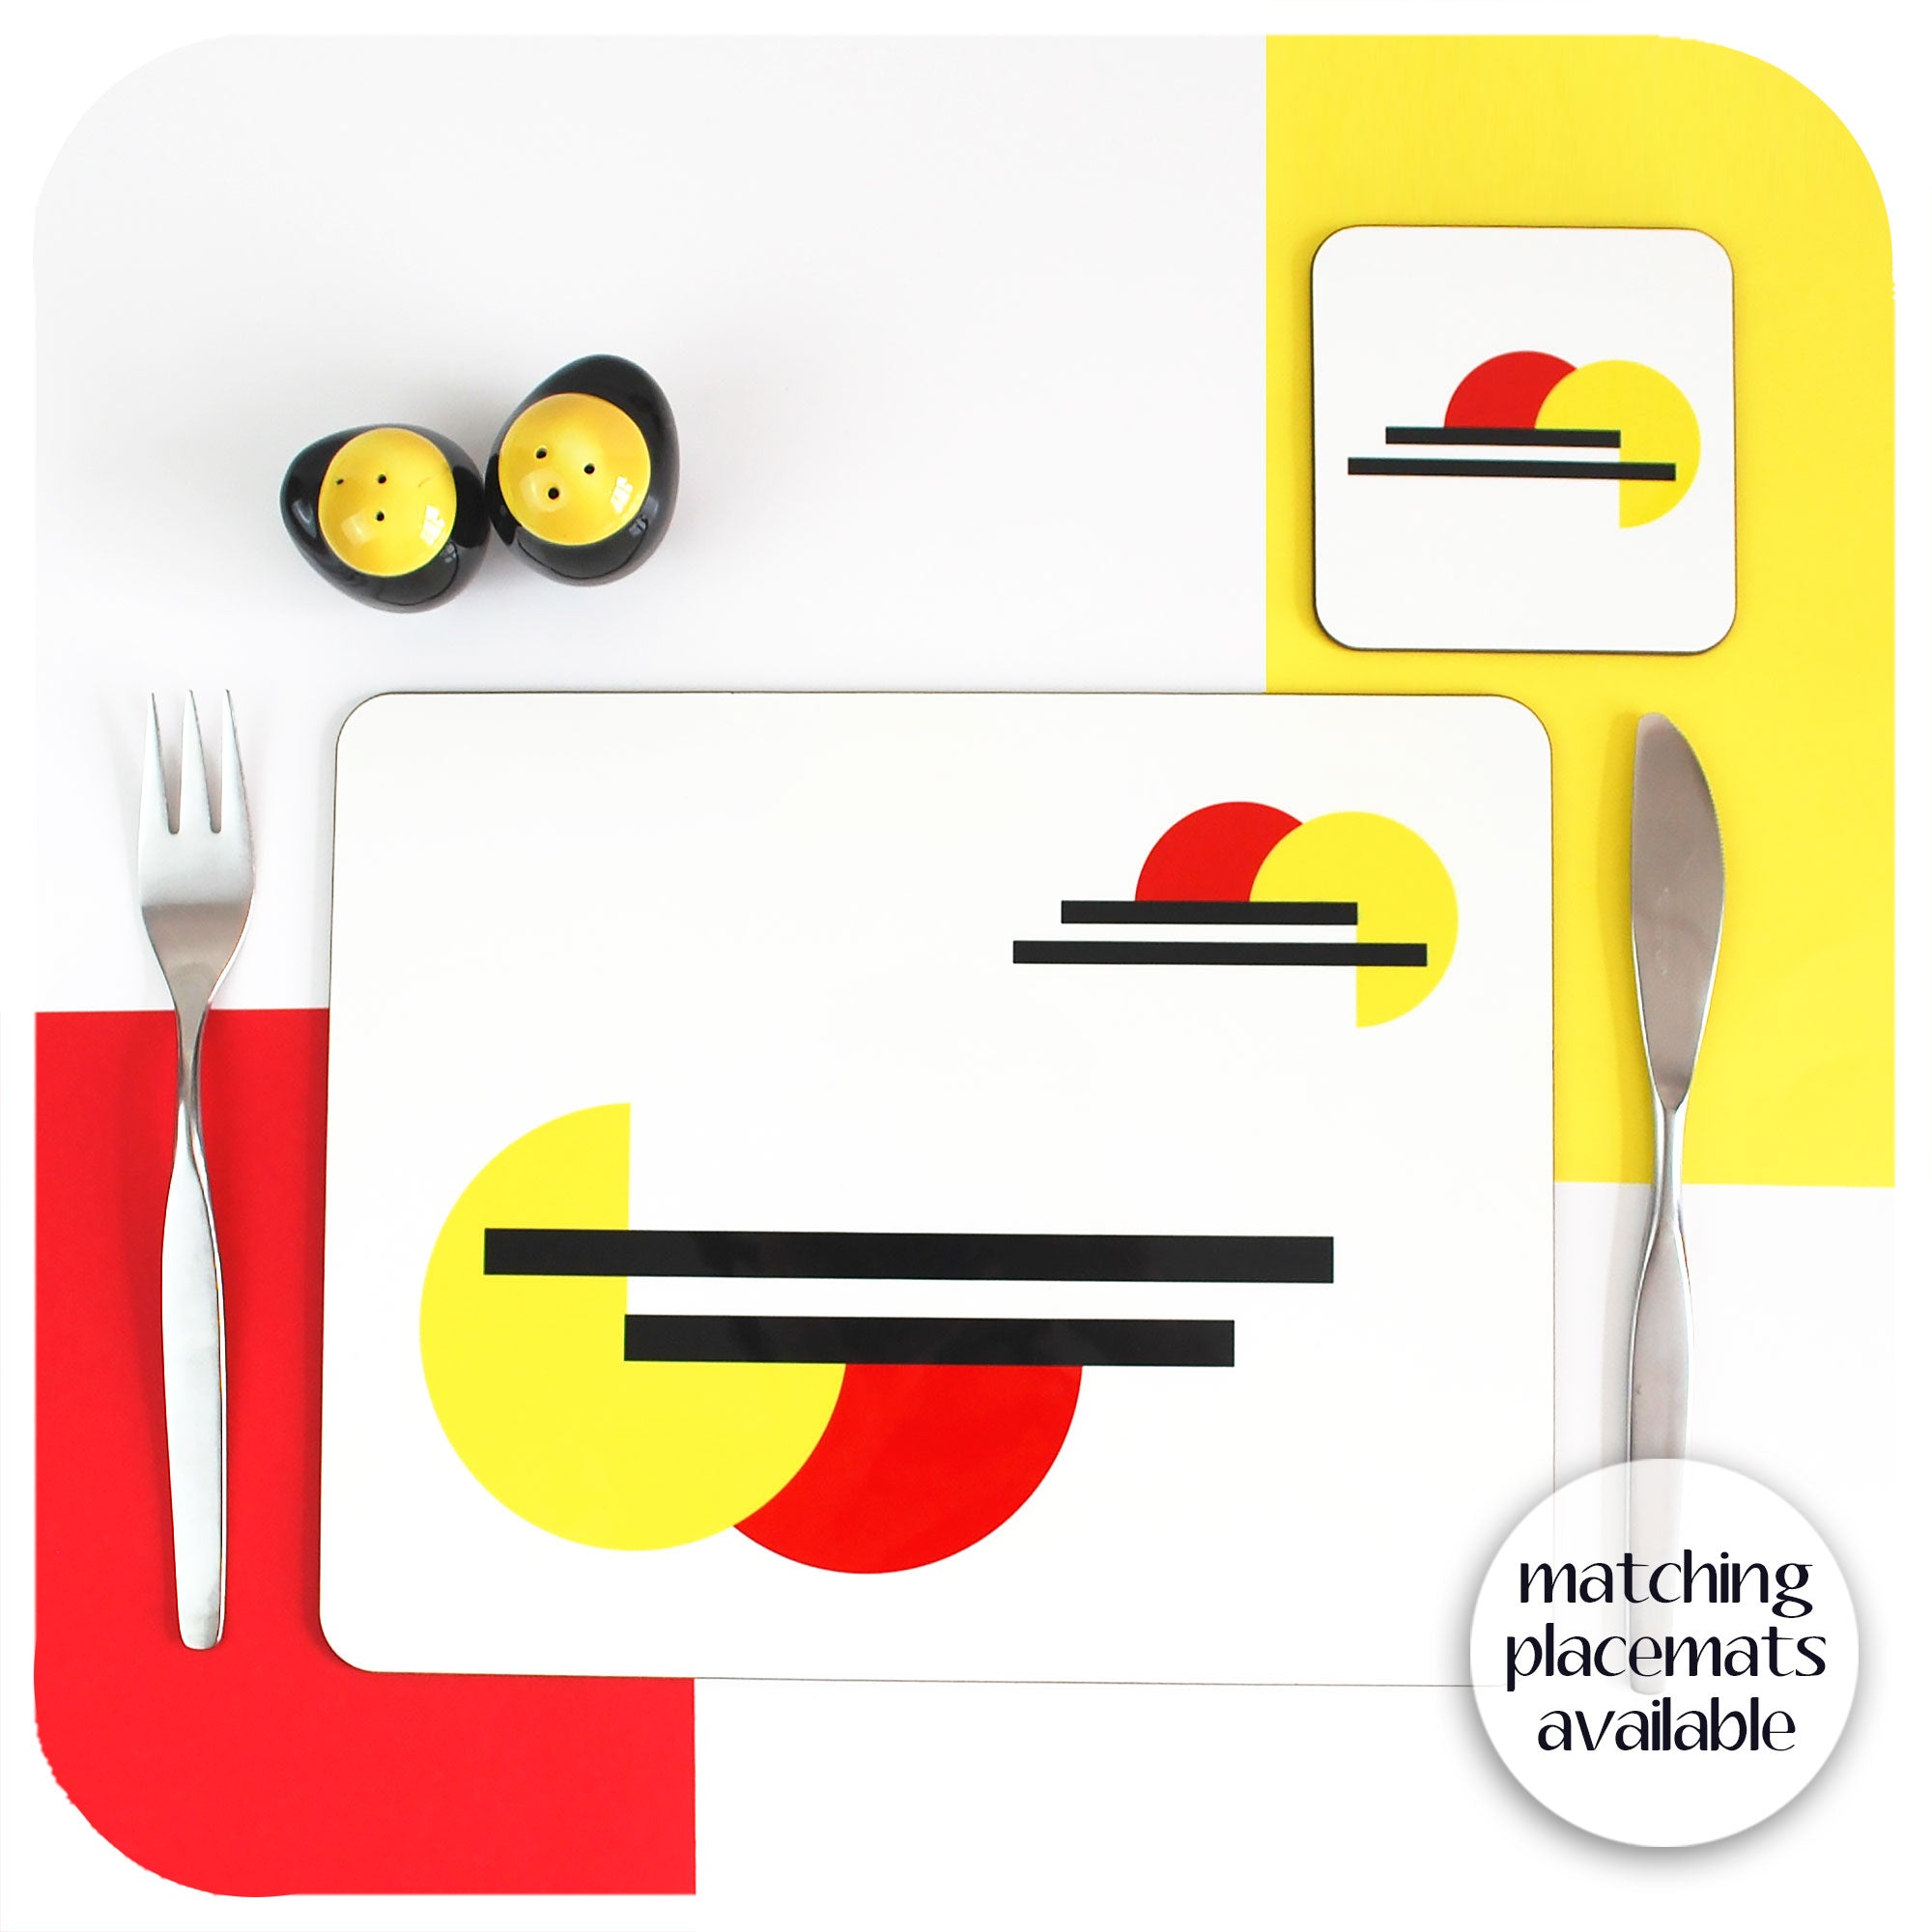 Matching bauhaus style placemat and coaster available | The Inkabilly Emporium